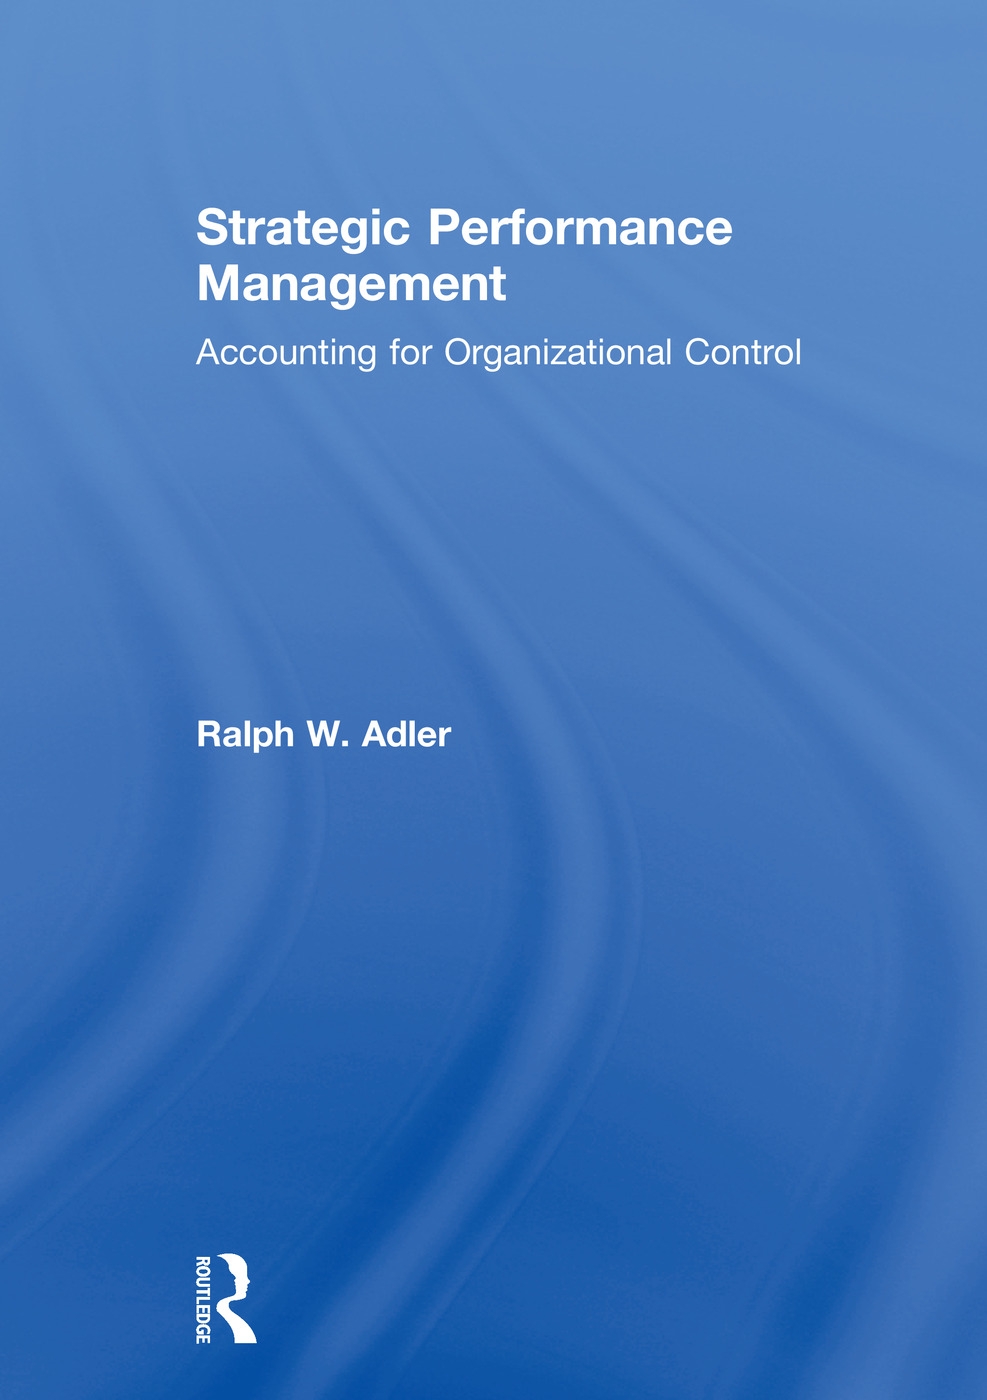 Strategic Performance Management: Accounting for Organizational Control